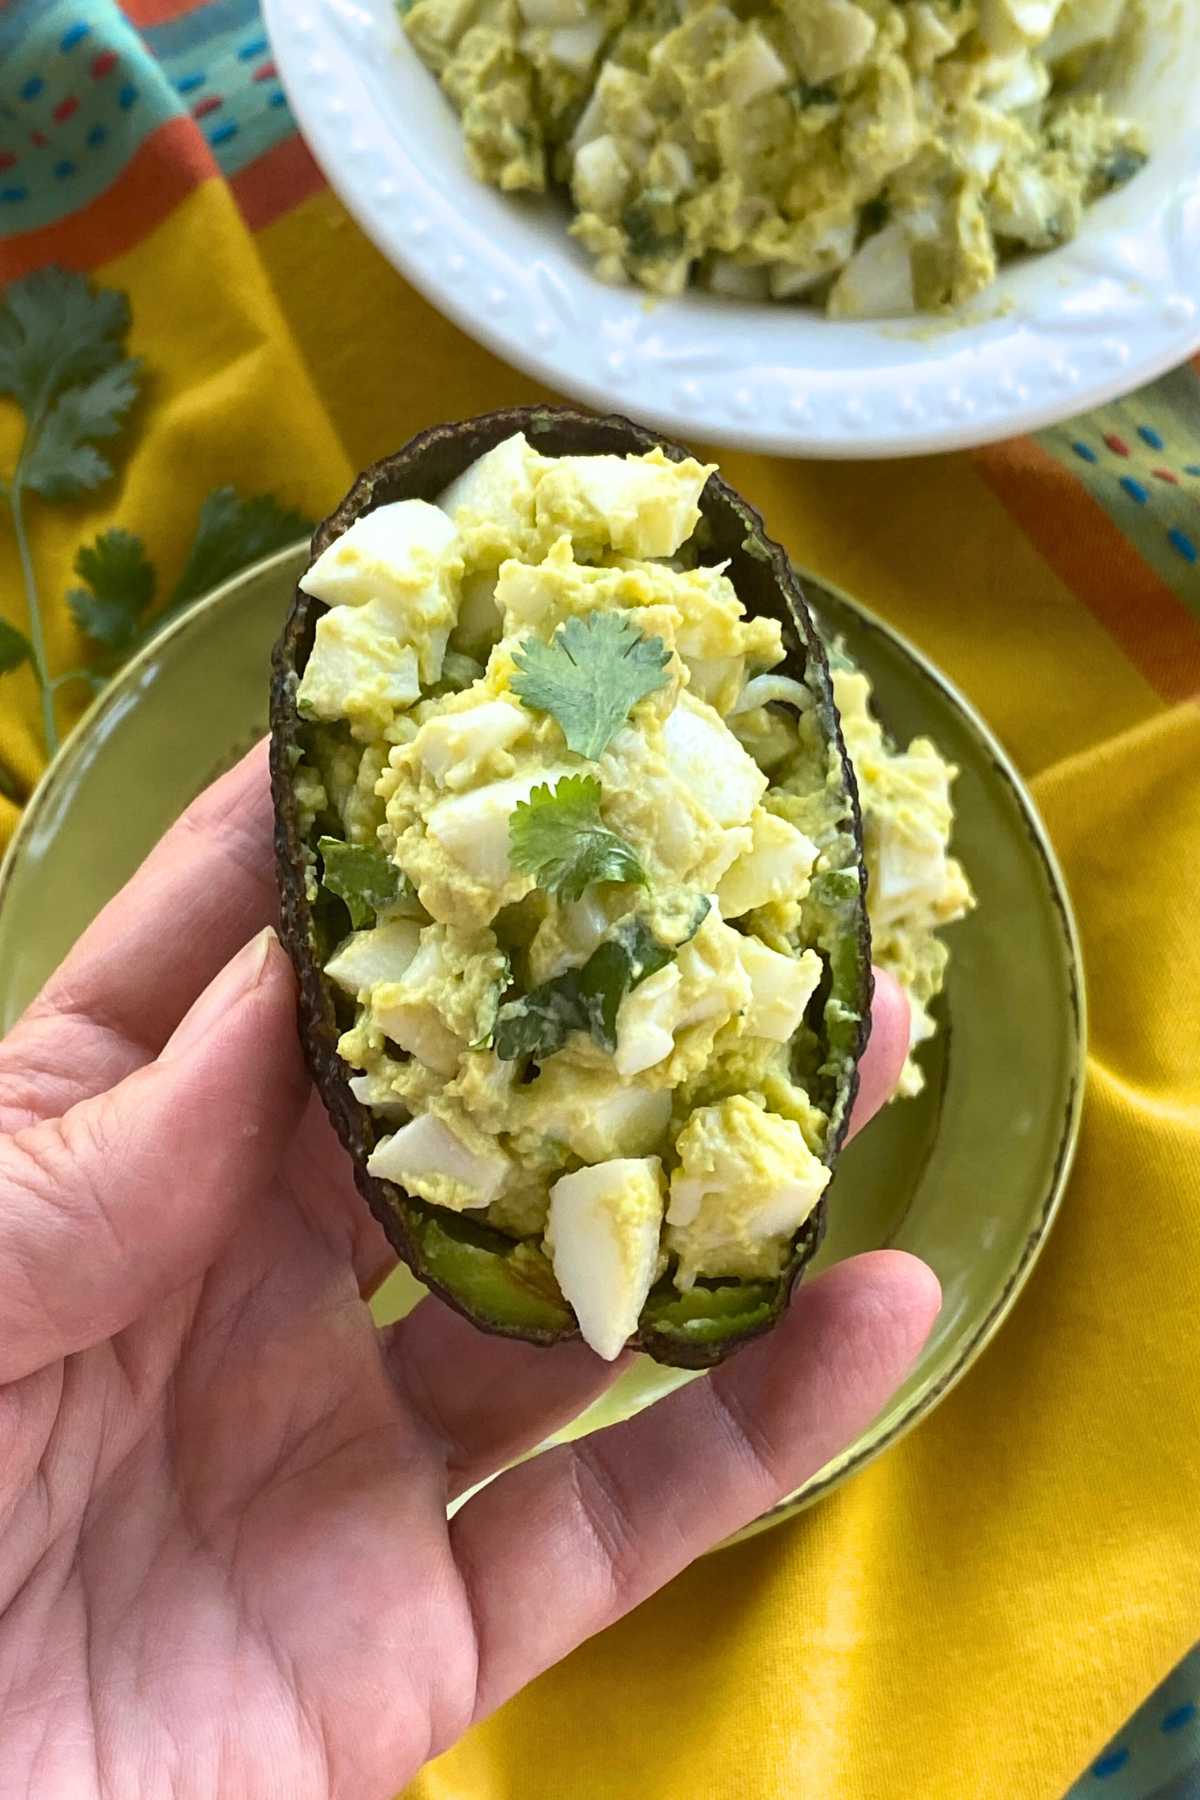 Hand holding a scooped out avocado half filled with healthy egg salad.